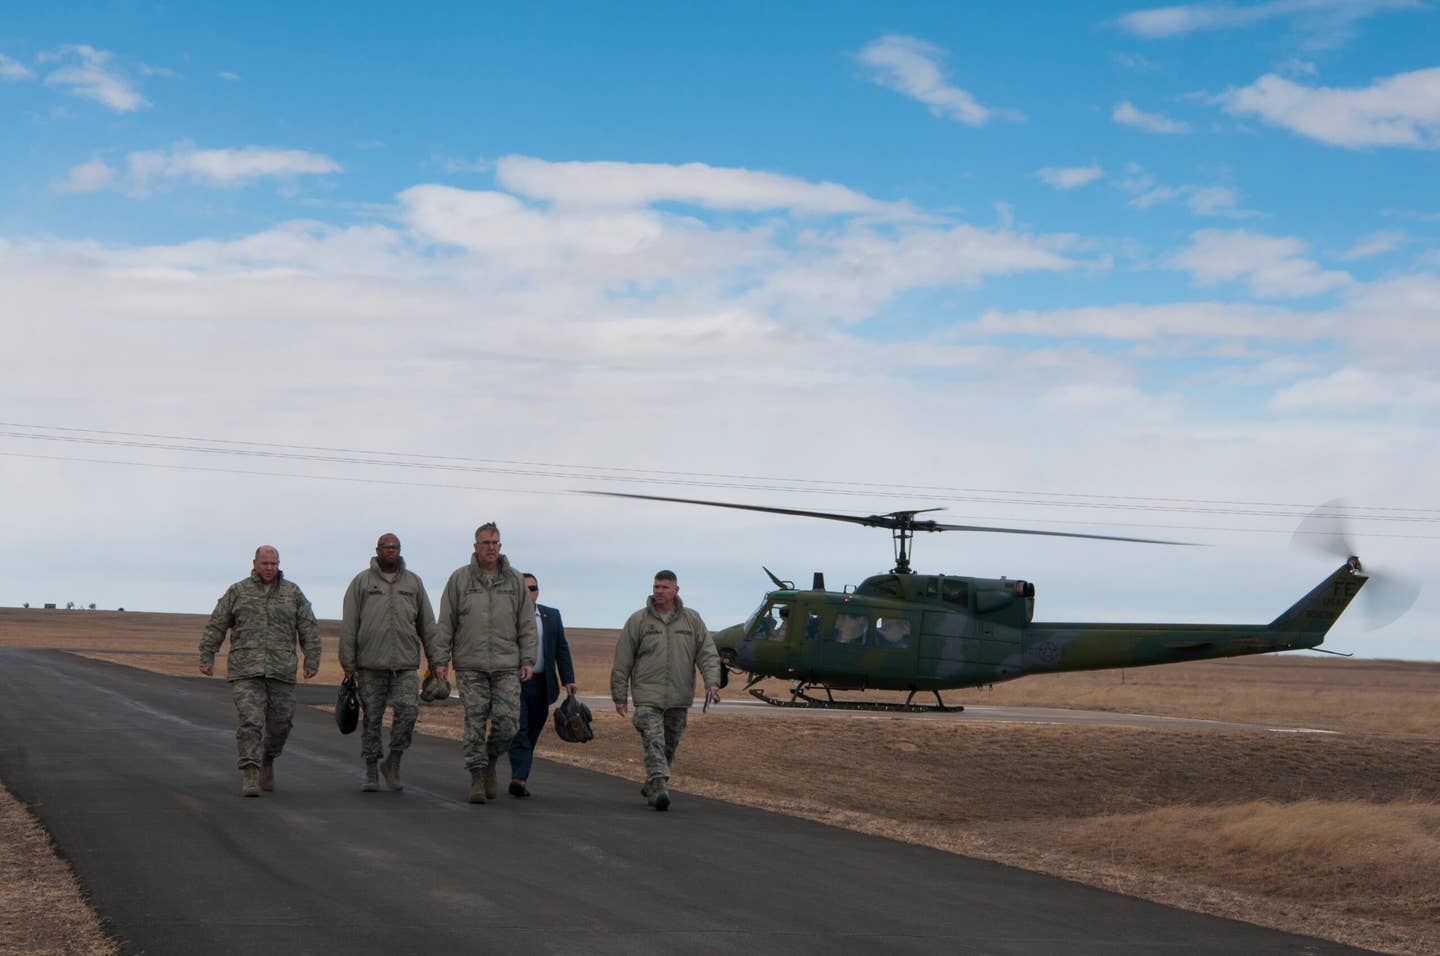 U.S. Air Force Gen. John E. Hyten, the then U.S. Strategic Command commander, and members of his staff depart a 37th Helicopter Squadron UH-1N Huey near a missile alert facility on the F.E. Warren Air Force Base missile complex, in 2017. <em>U.S. Air Force photo by Staff Sgt. Christopher Ruano</em>